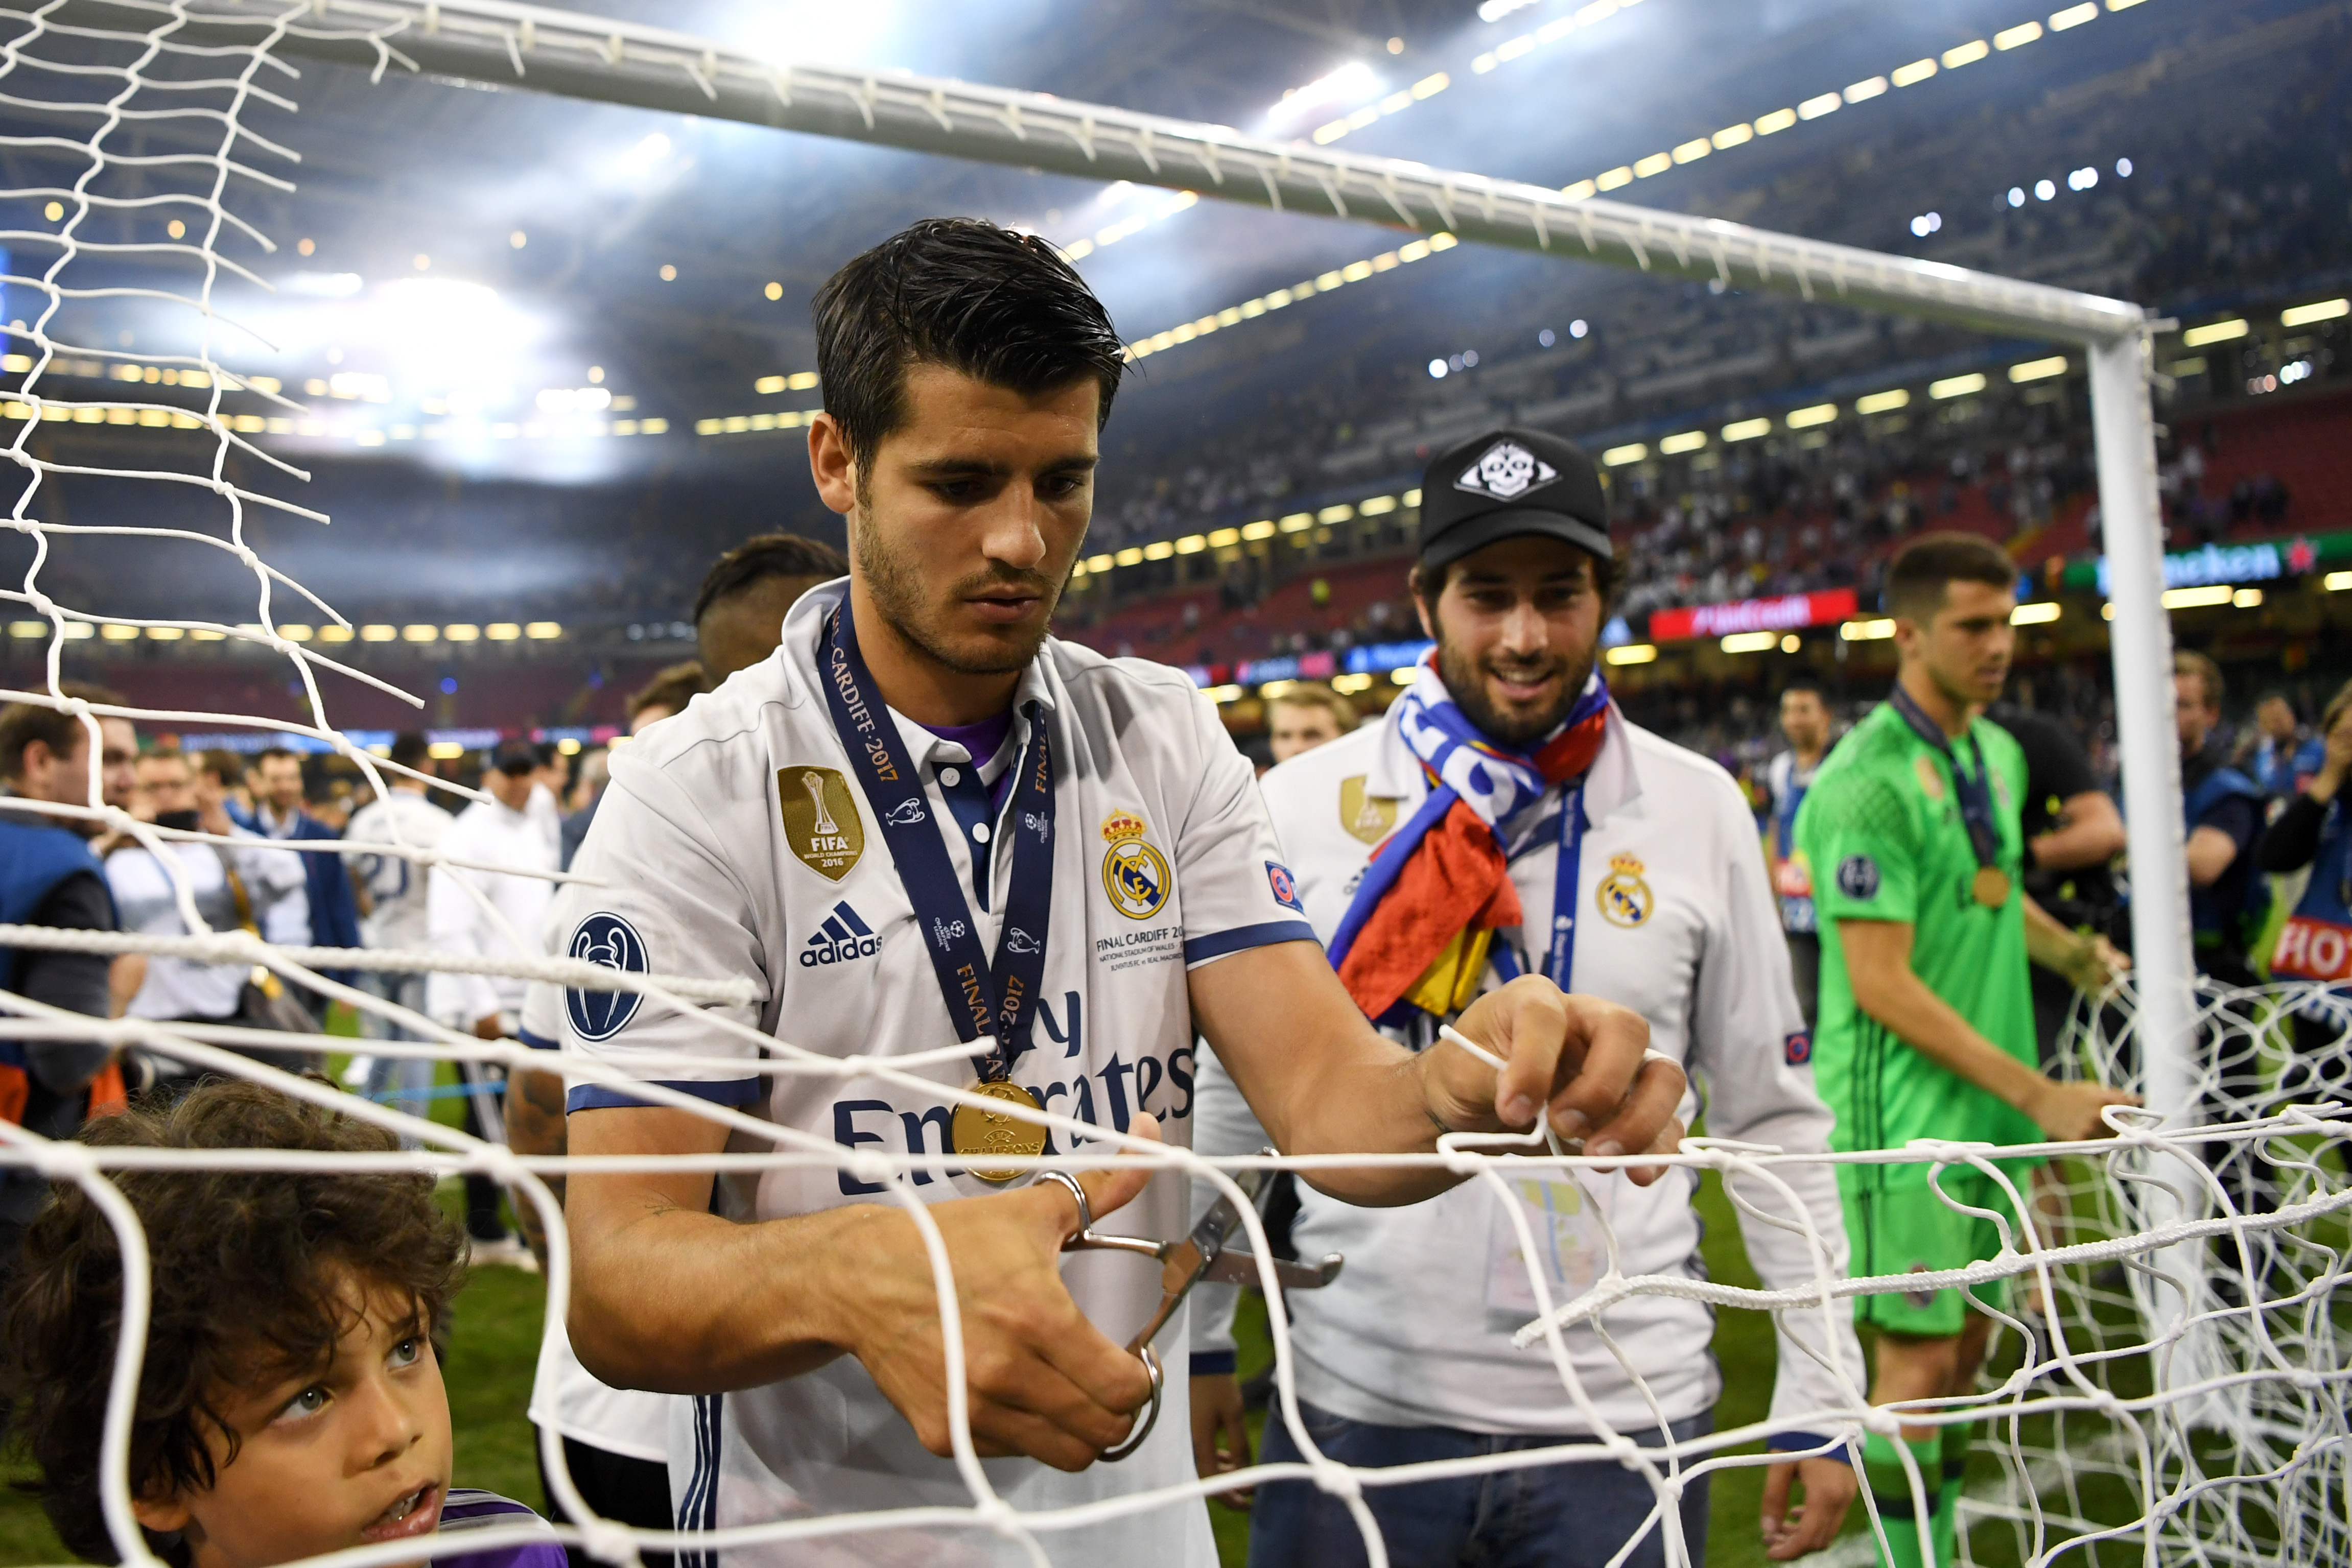 CARDIFF, WALES - JUNE 03:  Alvaro Morata of Real Madrid cuts the net after the UEFA Champions League Final between Juventus and Real Madrid at National Stadium of Wales on June 3, 2017 in Cardiff, Wales.  (Photo by Shaun Botterill/Getty Images)